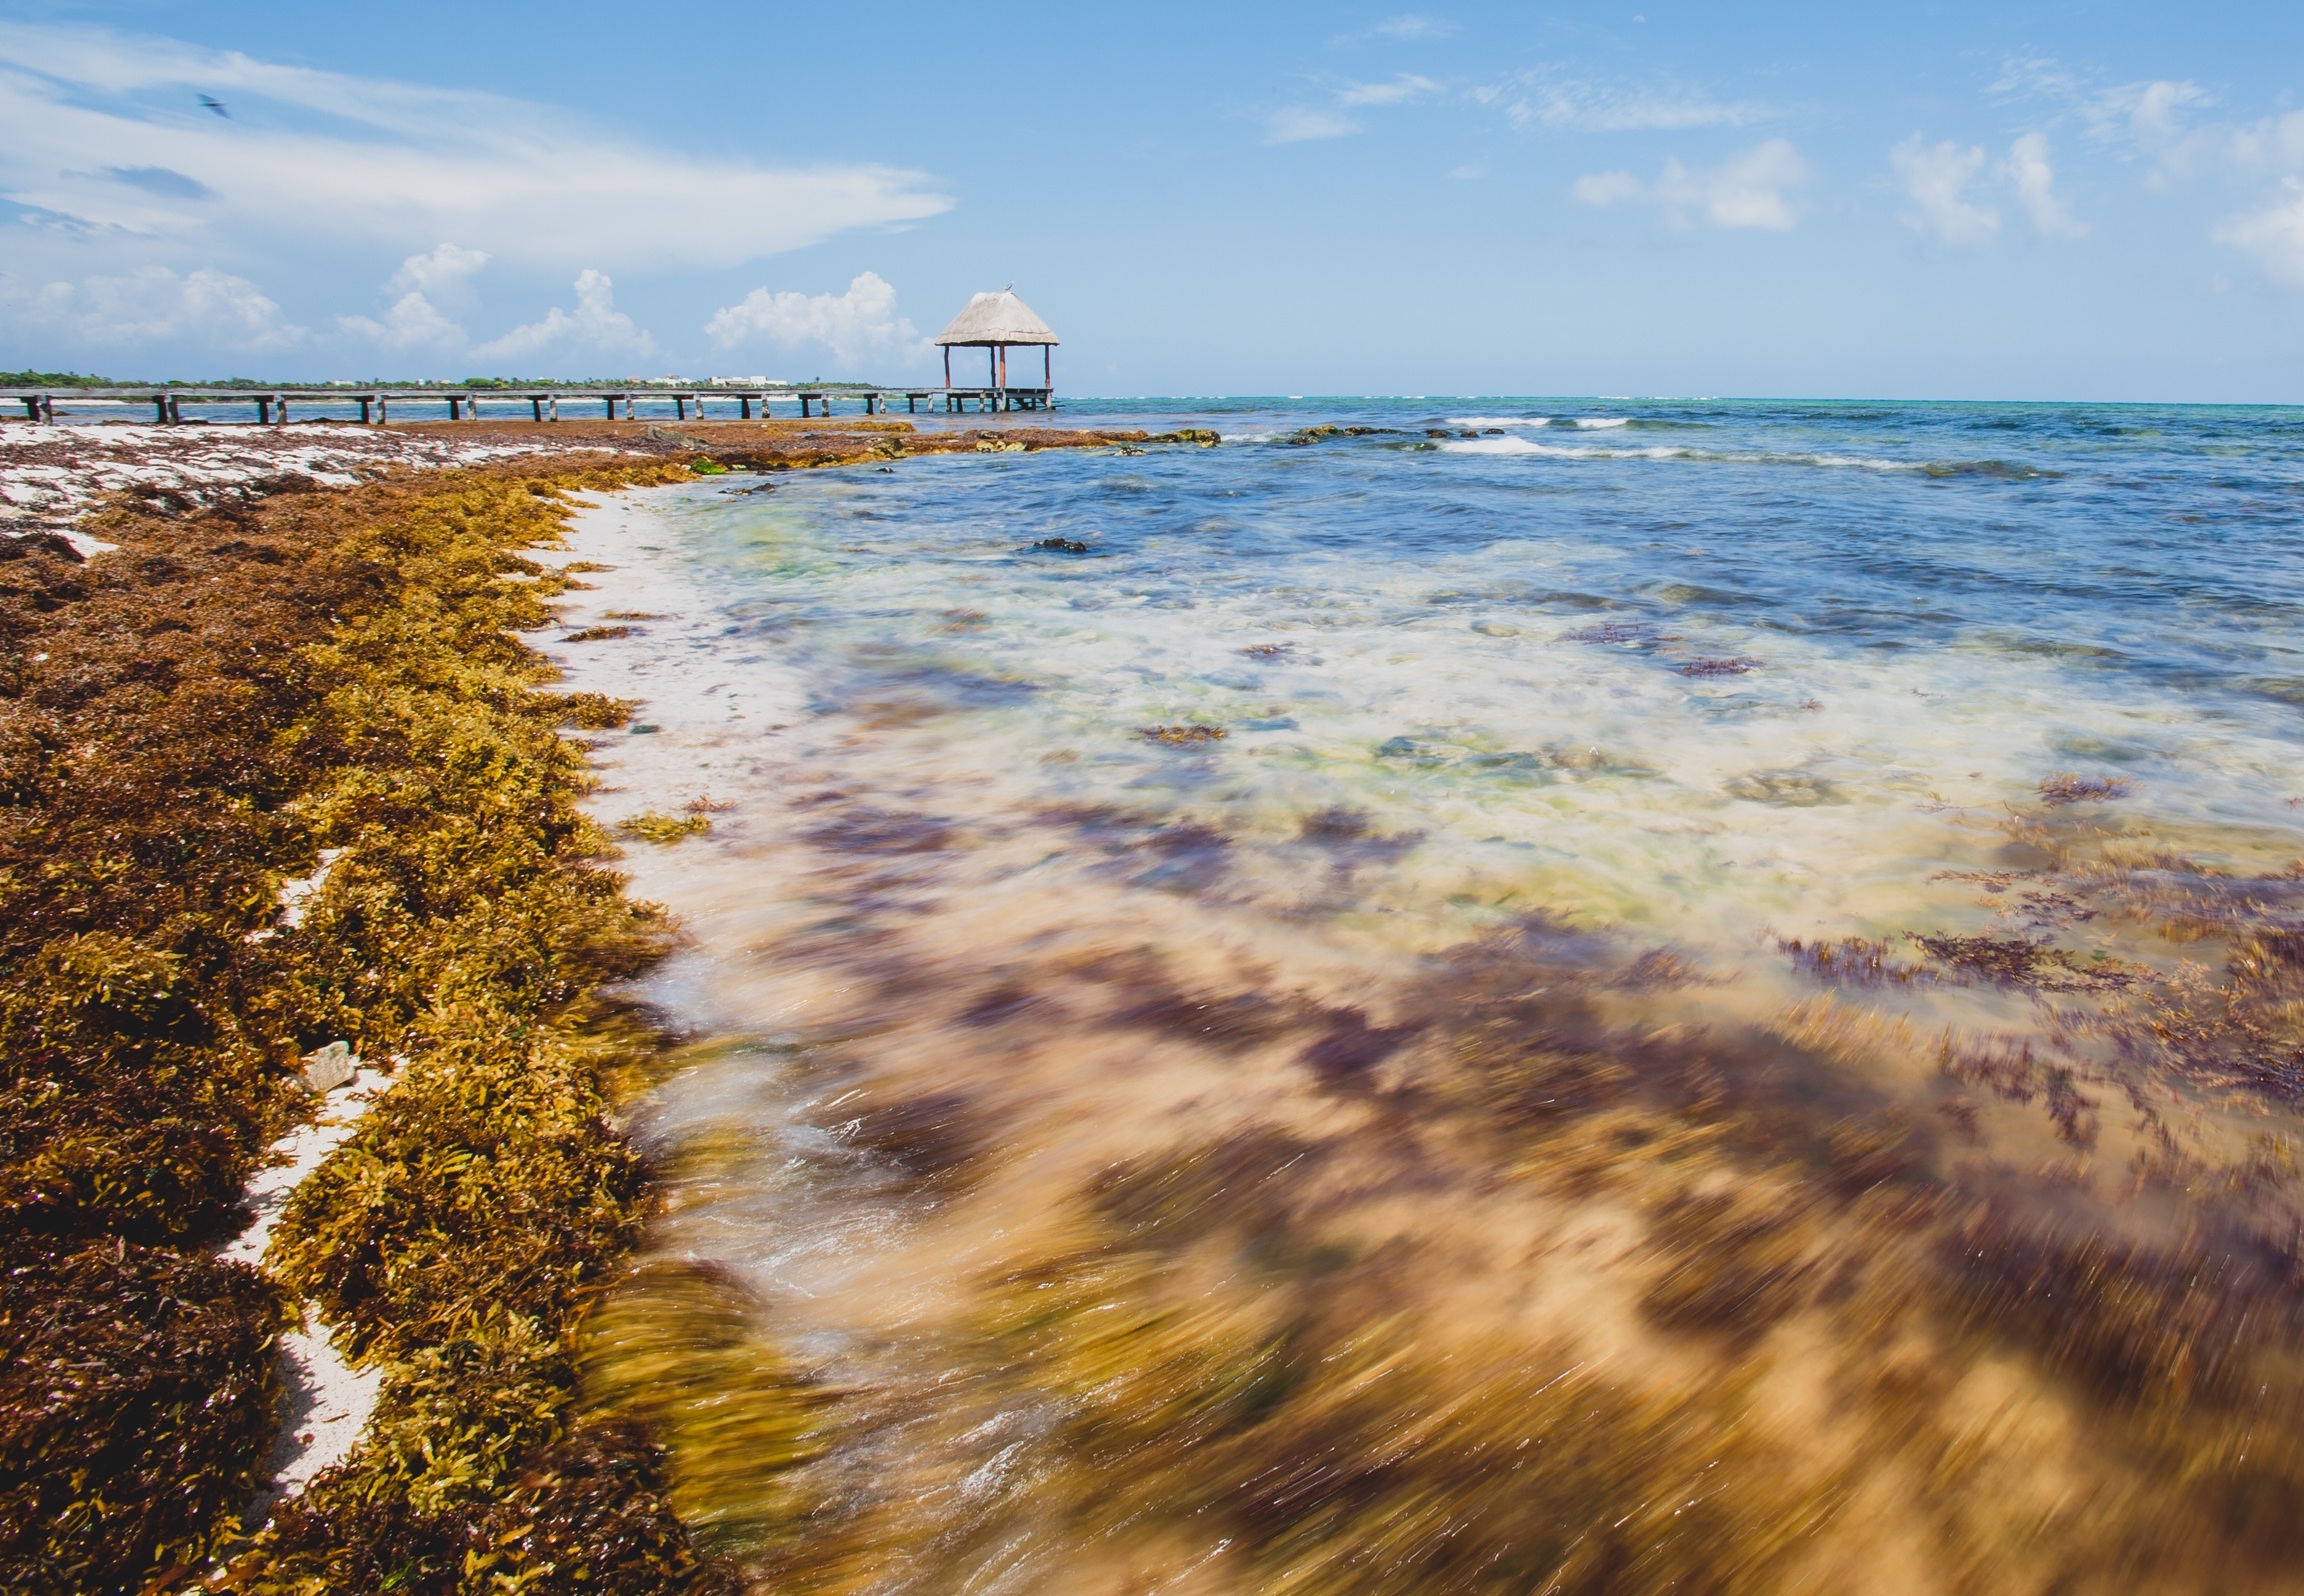 Overabundant seaweeds represent un-utilised biomass in shallow water, beach and coastal areas. The excessive richness of nutrients this causes damages marine ecosystems and impairs local tourism; this excessive biomass could serve as biogas feedstock material.